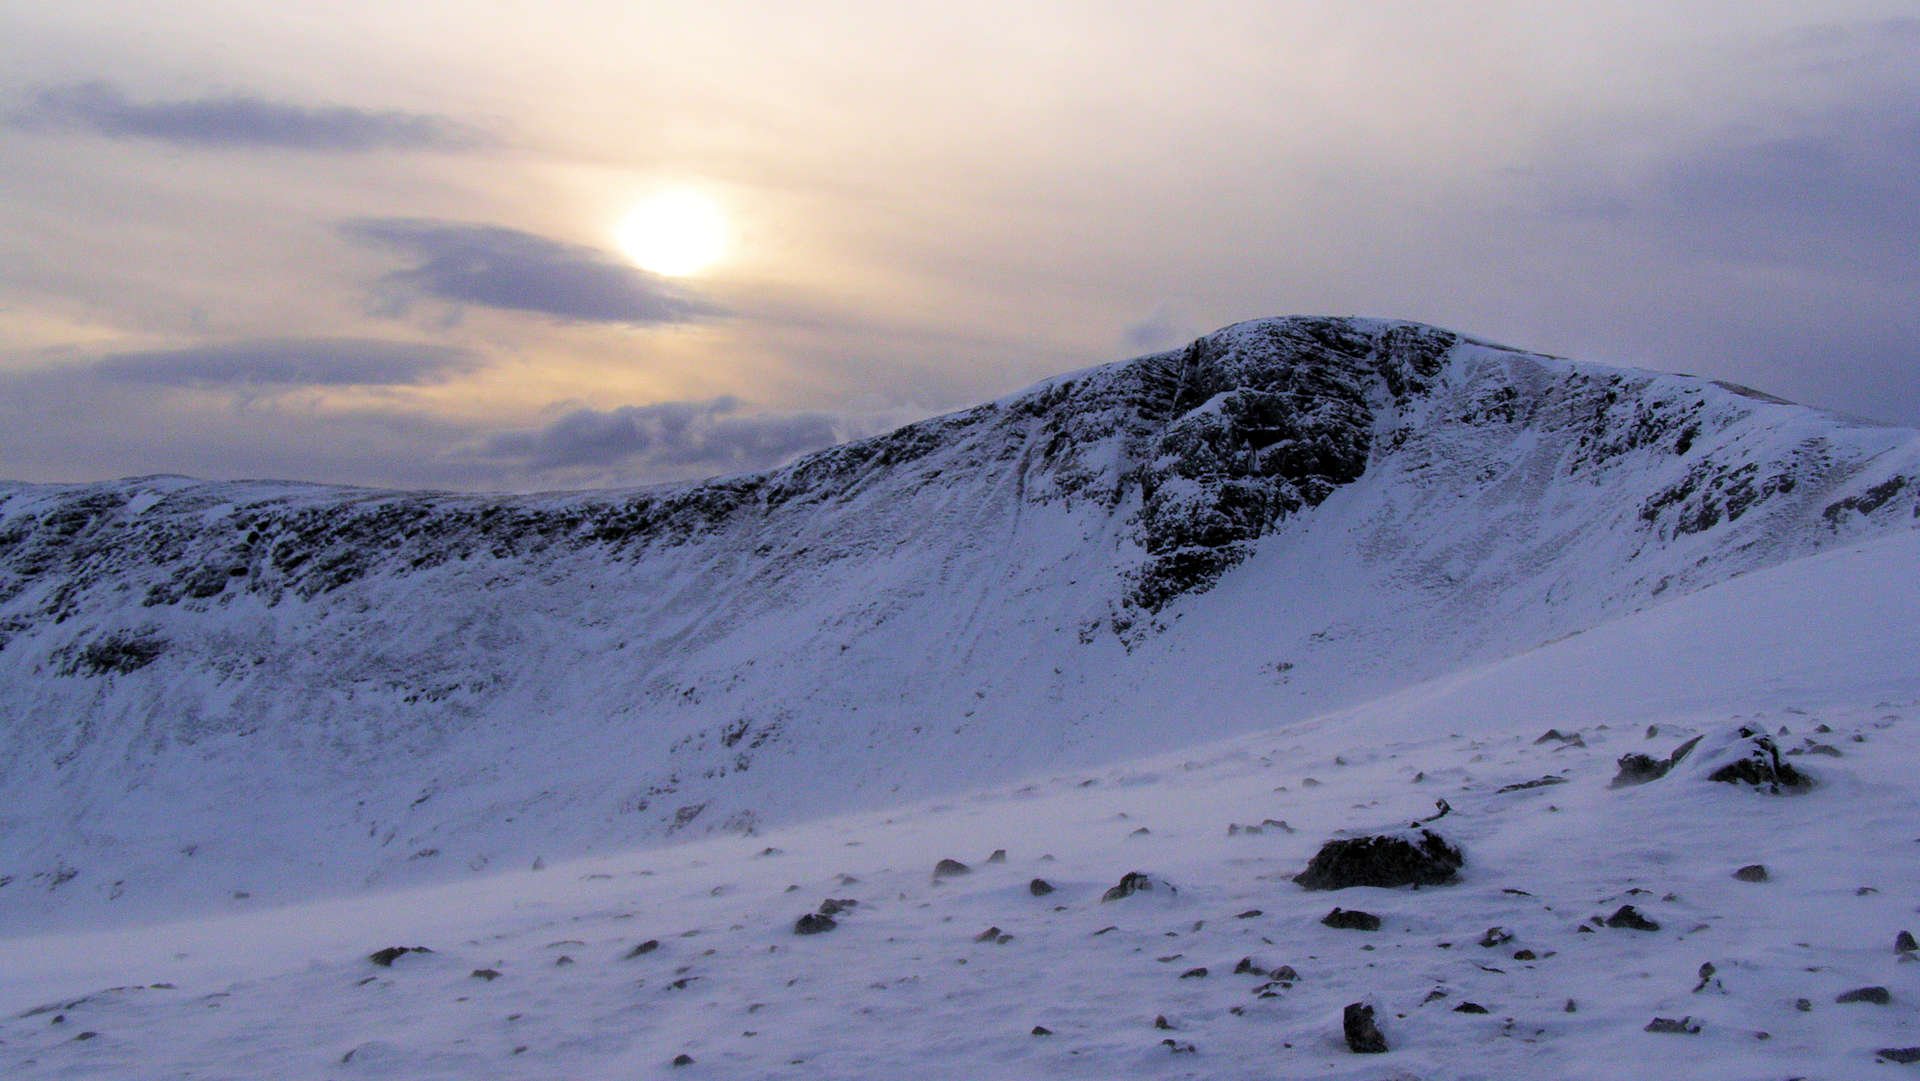 Summit crags of Stob Coire a'Chearcaill